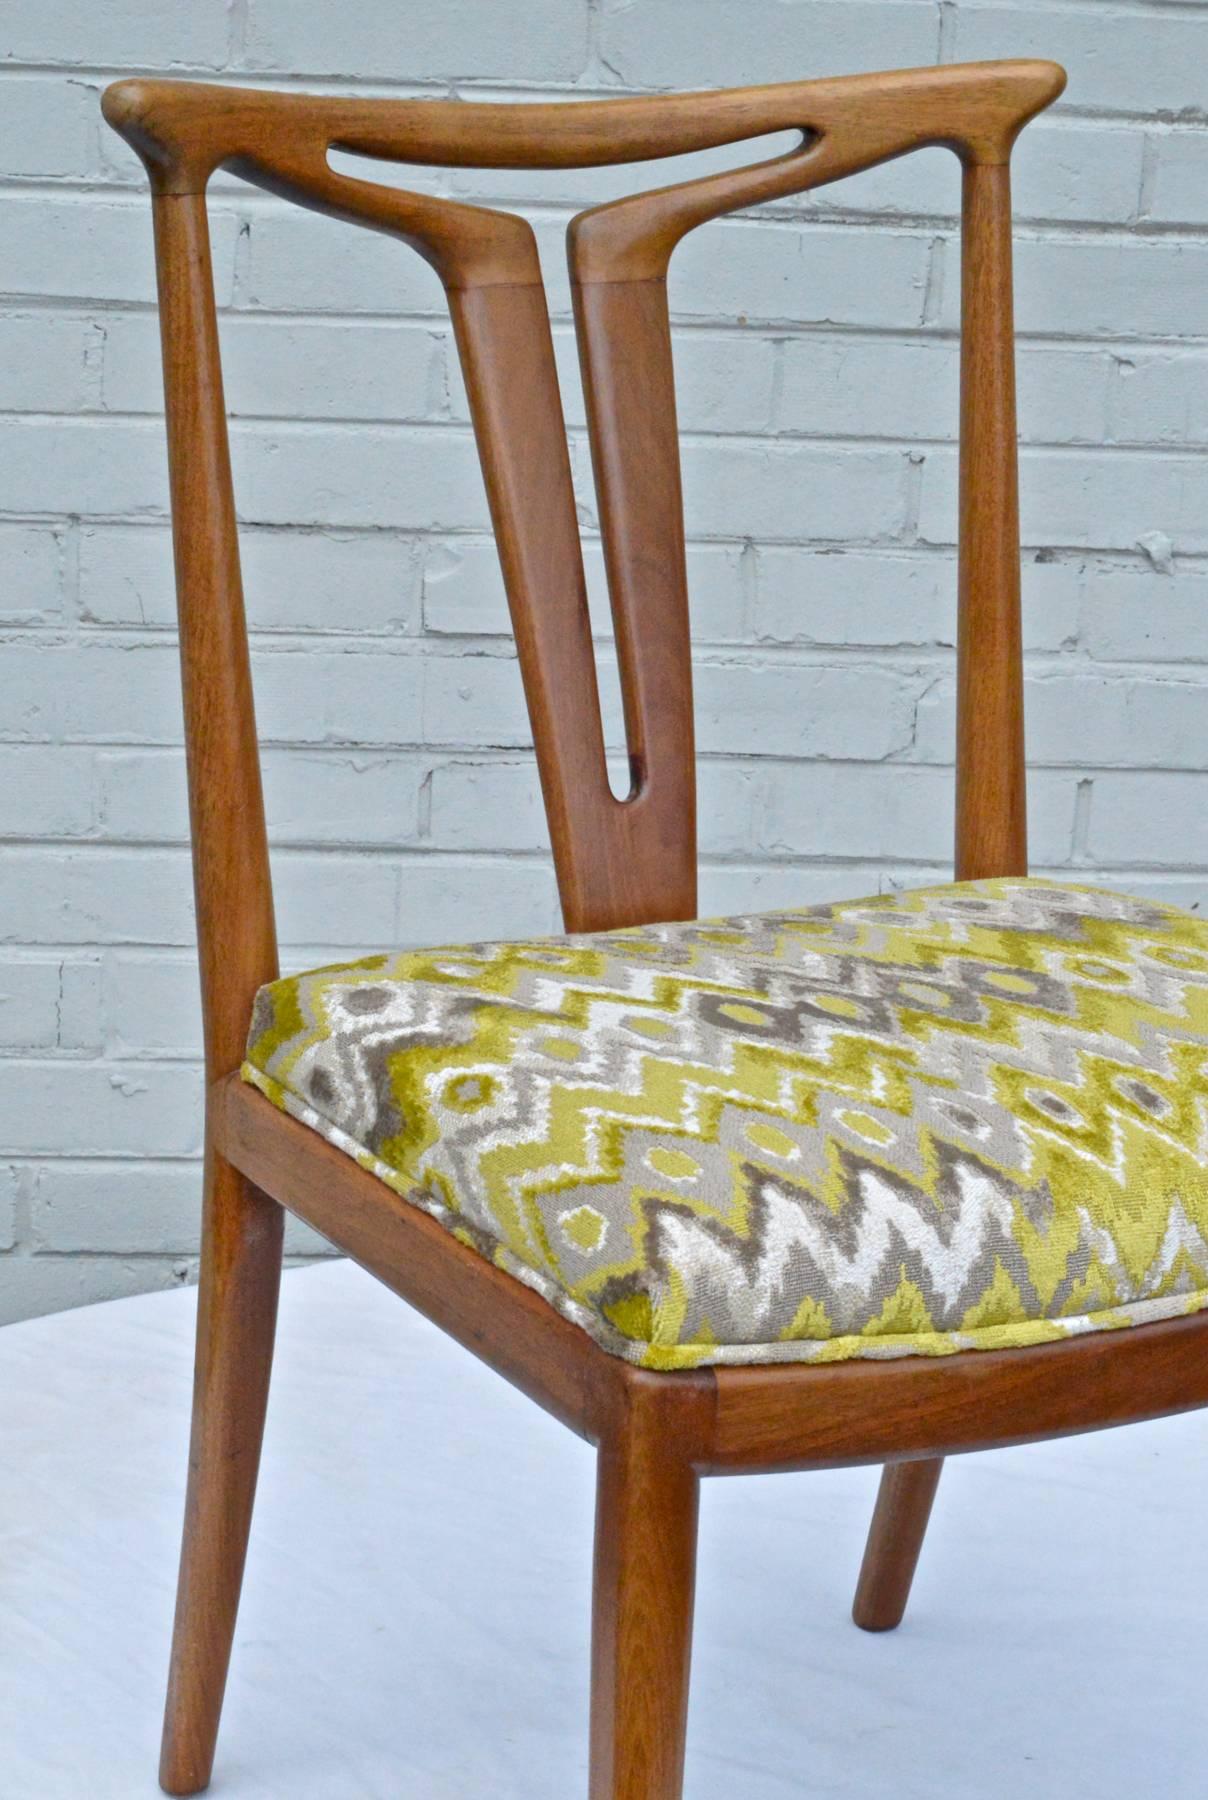 American Modern Chair Quad with T-Back Splats 1